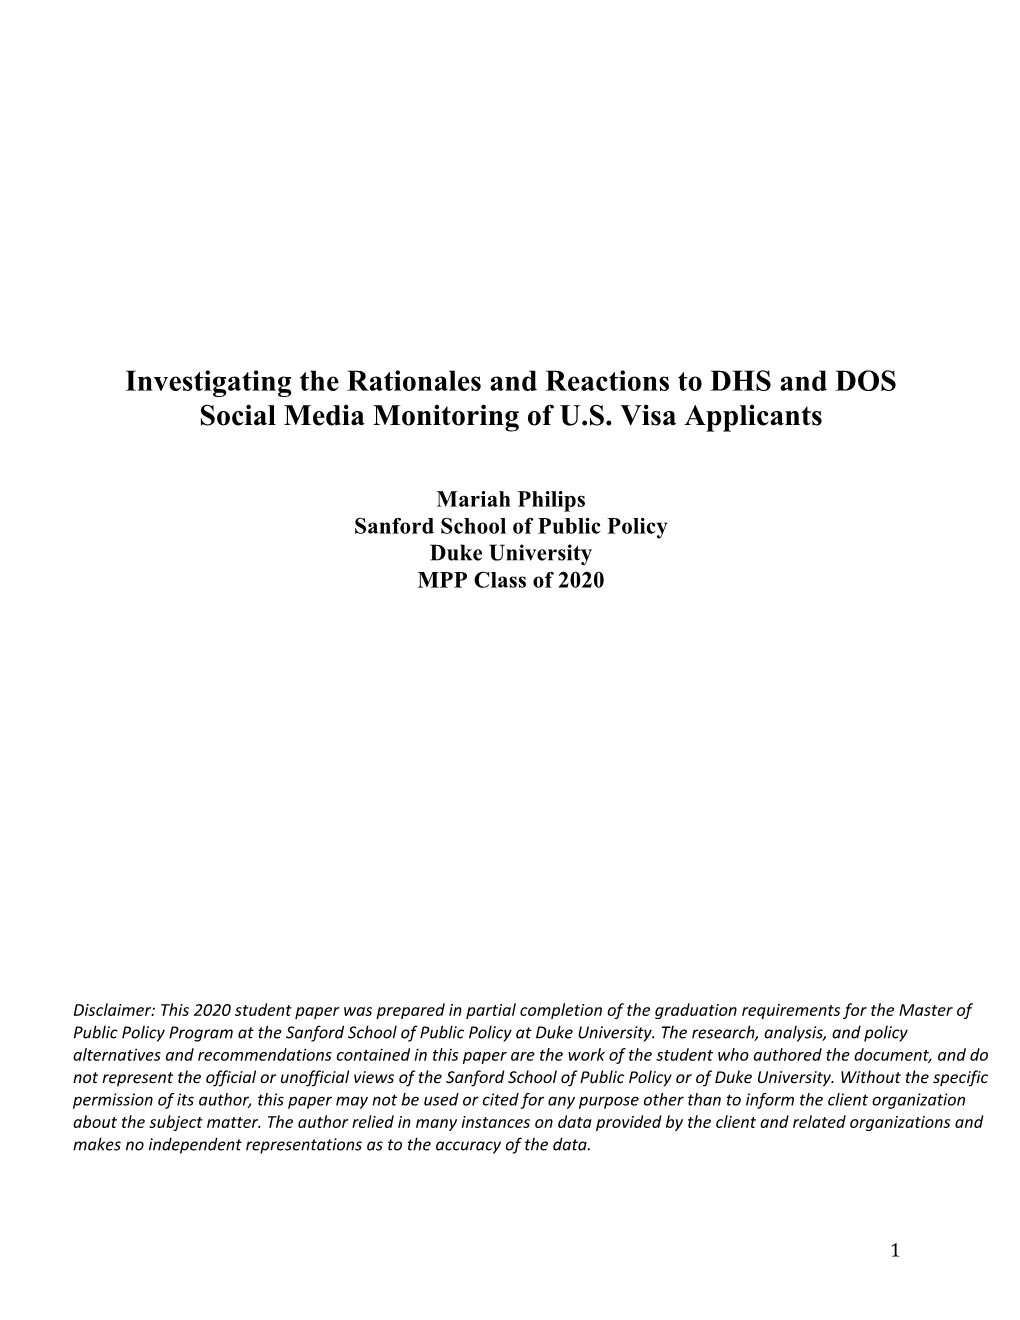 Investigating the Rationales and Reactions to DHS and DOS Social Media Monitoring of U.S